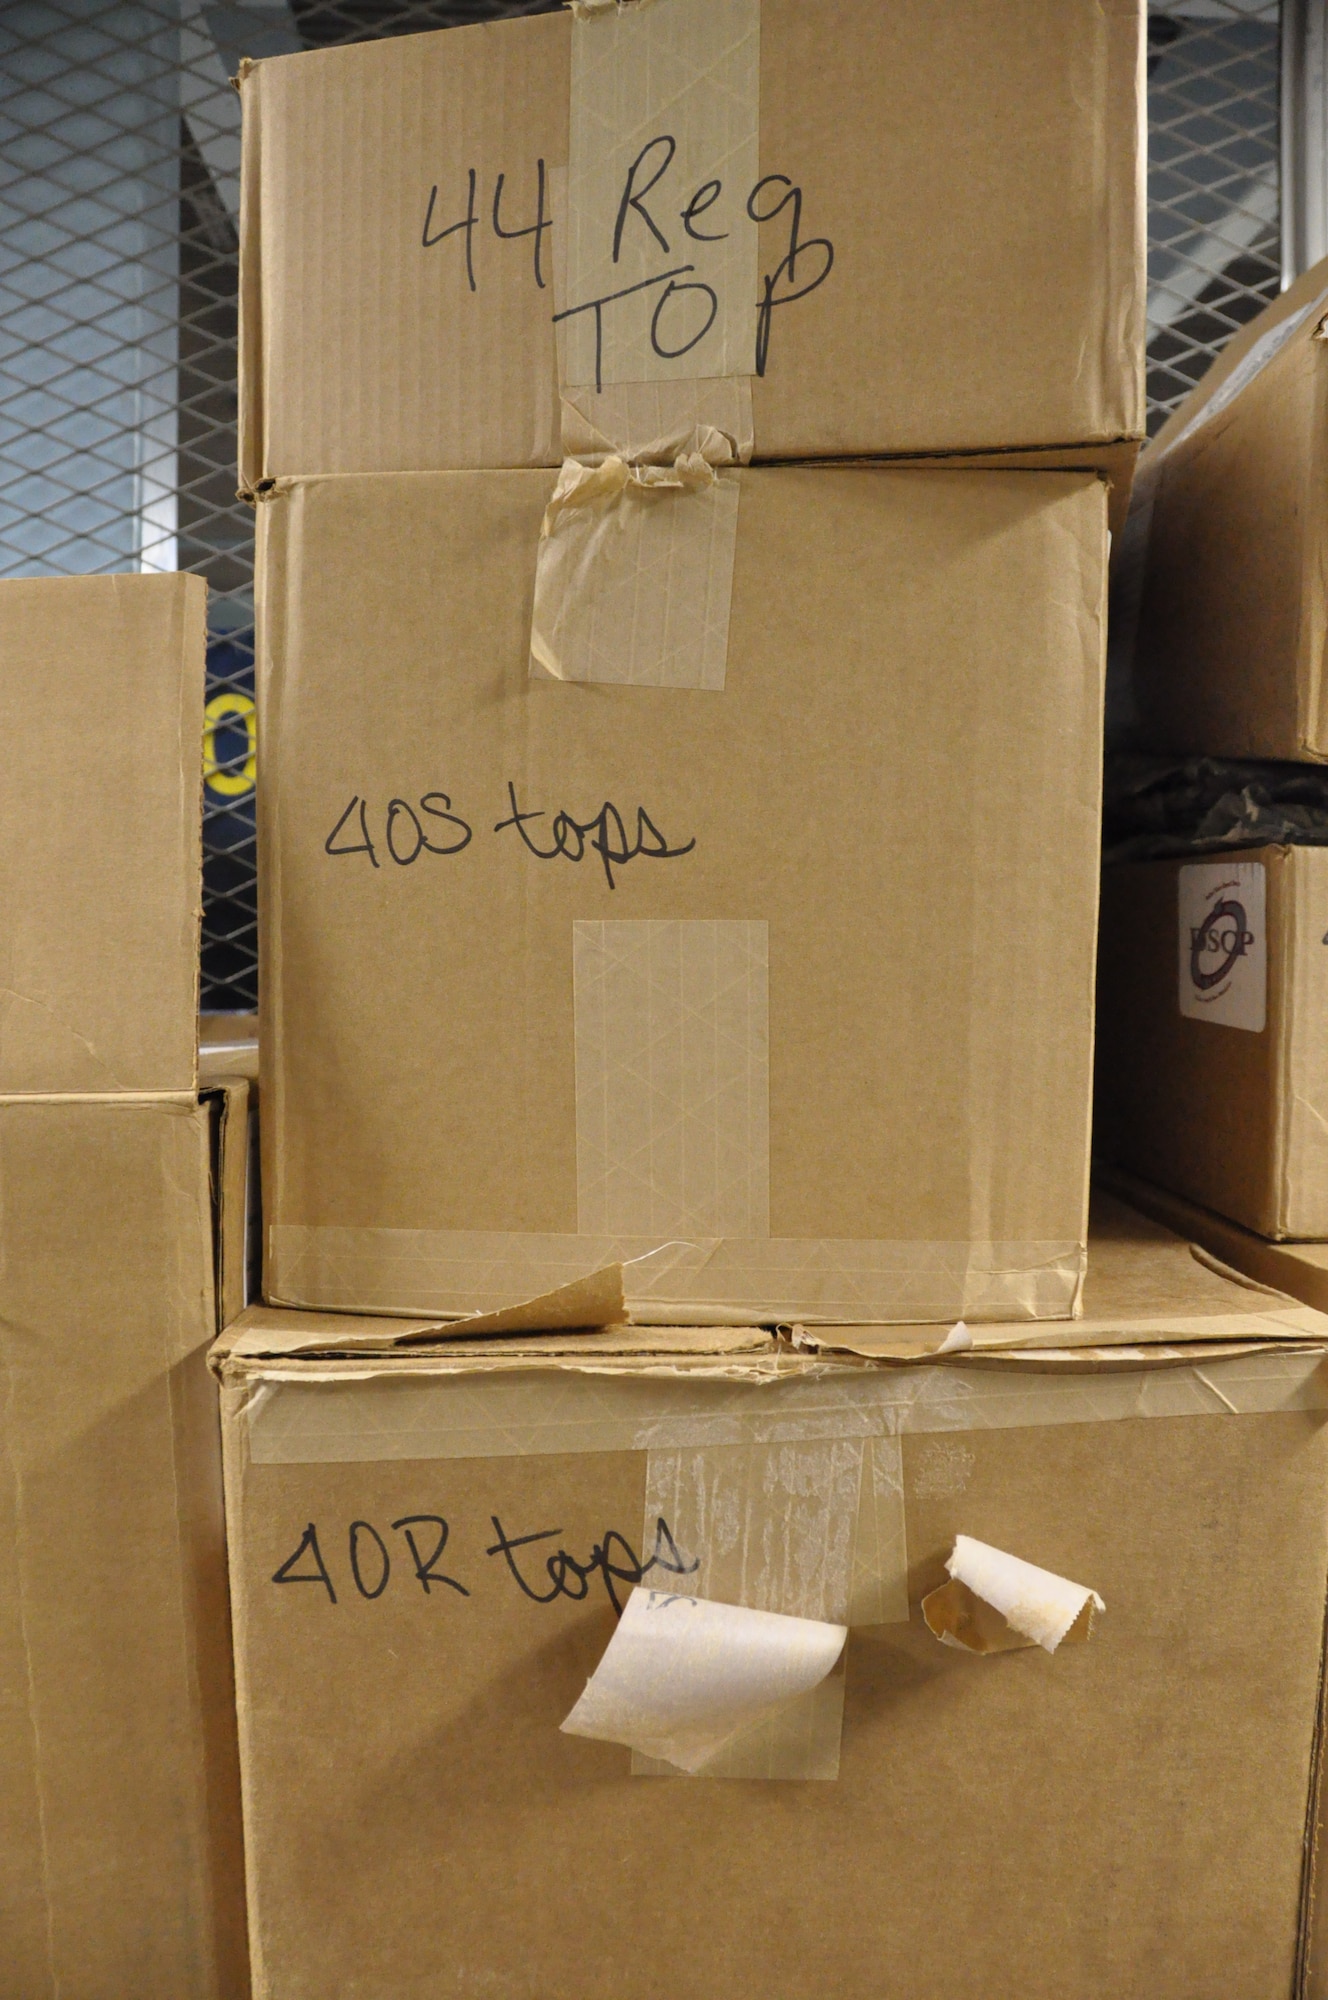 Boxes of ABU blouses awaiting pickup are stacked high in the supply warehouse of the 128th Air Refueling Wing. (US Air Force Photo by: SSgt Nathan Wallin)